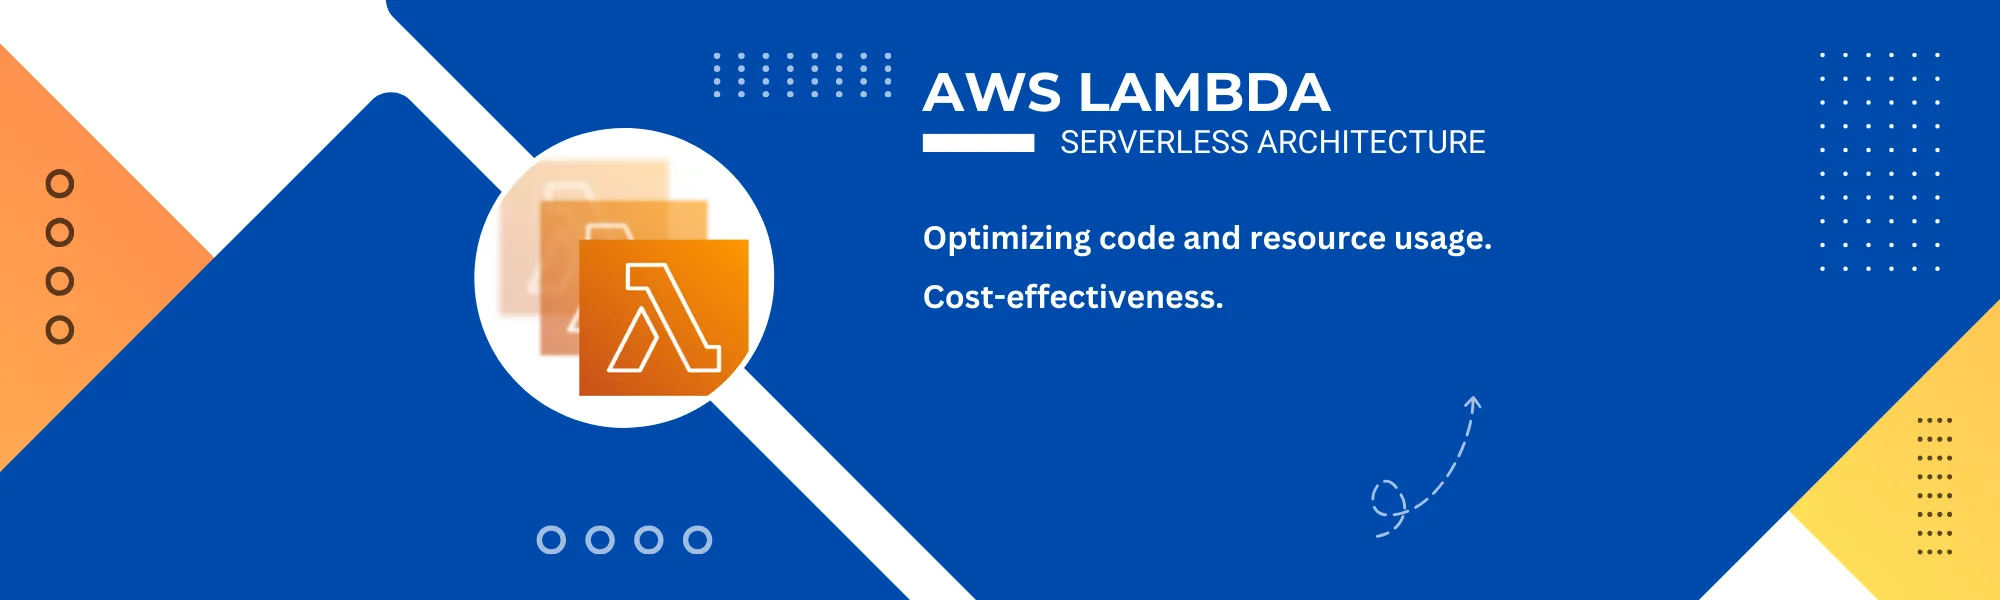 Scaling to Infinity: Mastering Hyperscale AWS Serverless Architecture with Lambdas